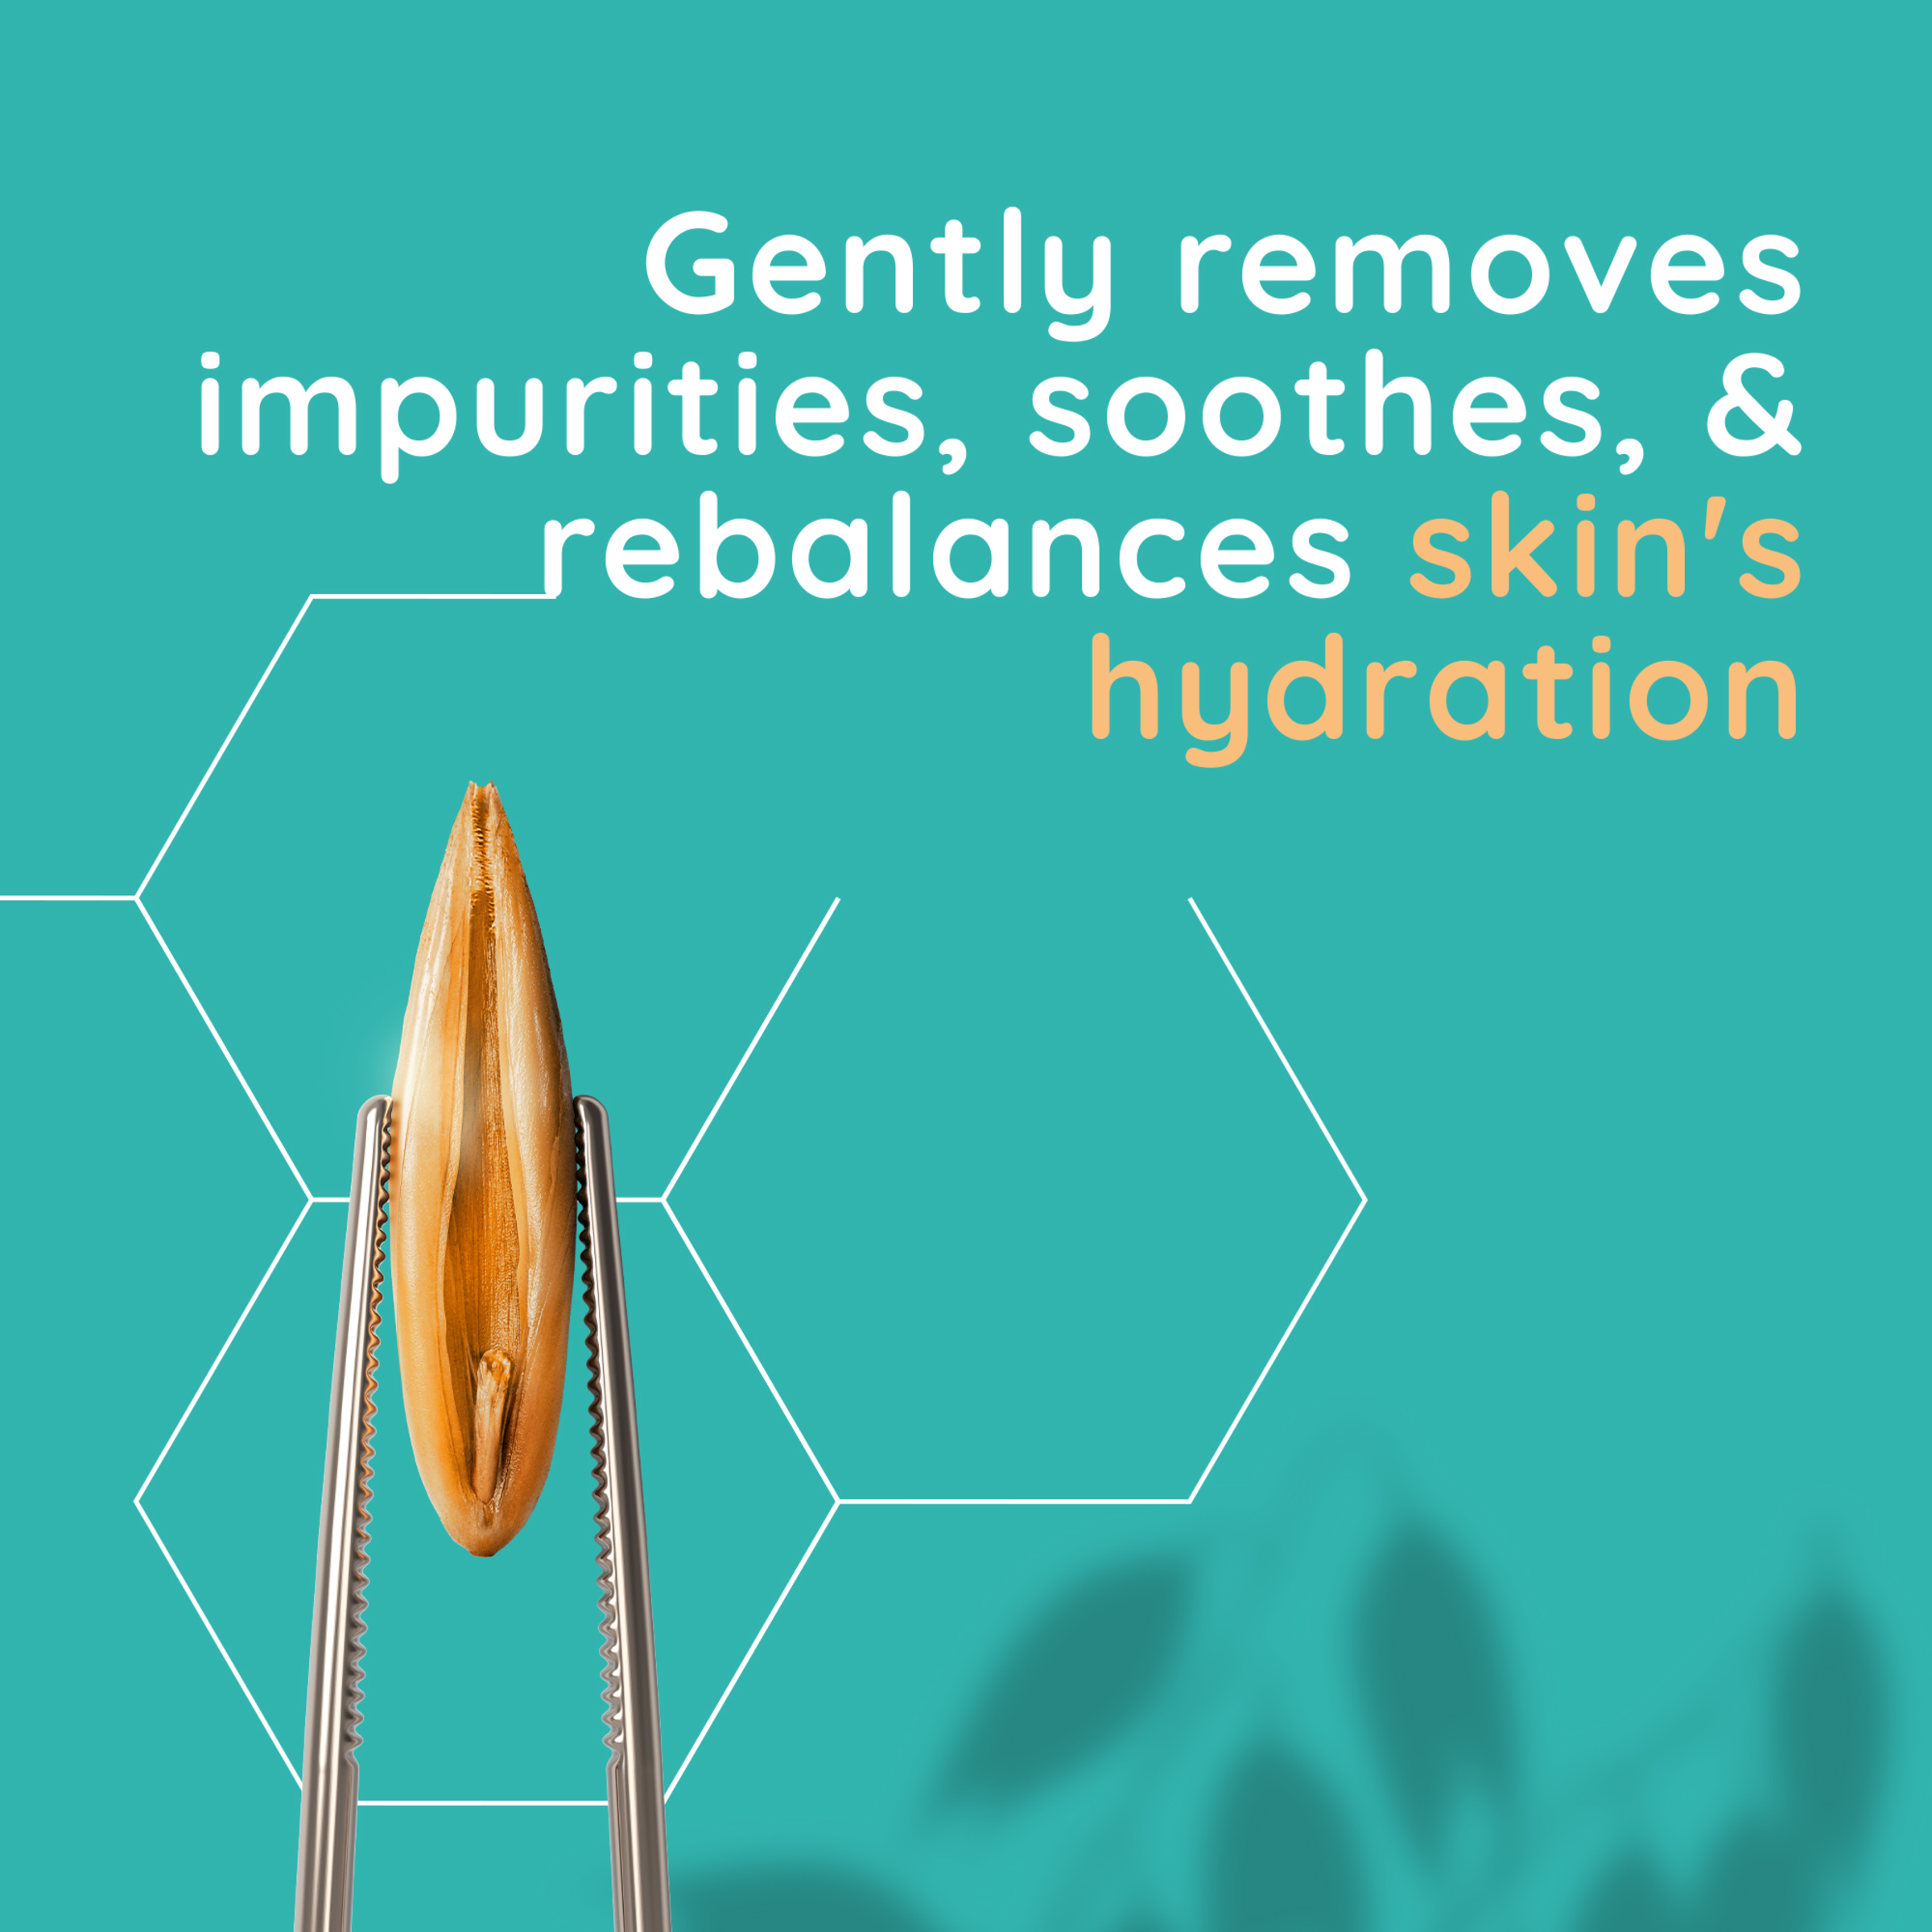 gently removes impurities, soothes & rebalances skin’s hydration